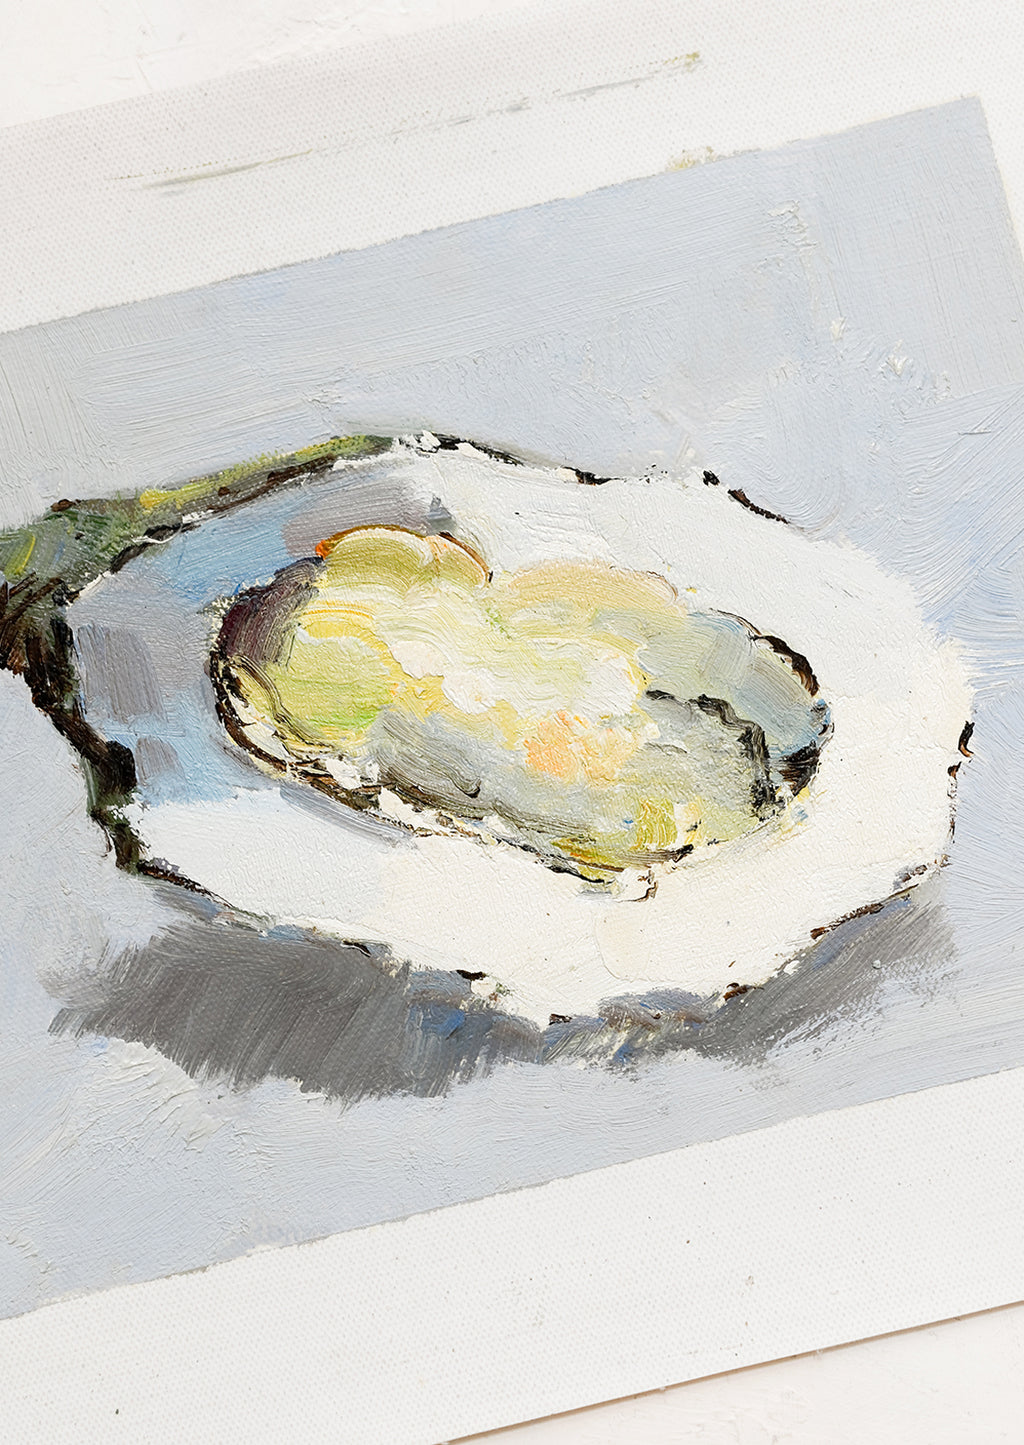 2: An original oil painting on unstretched canvas of oyster still life on blue background.